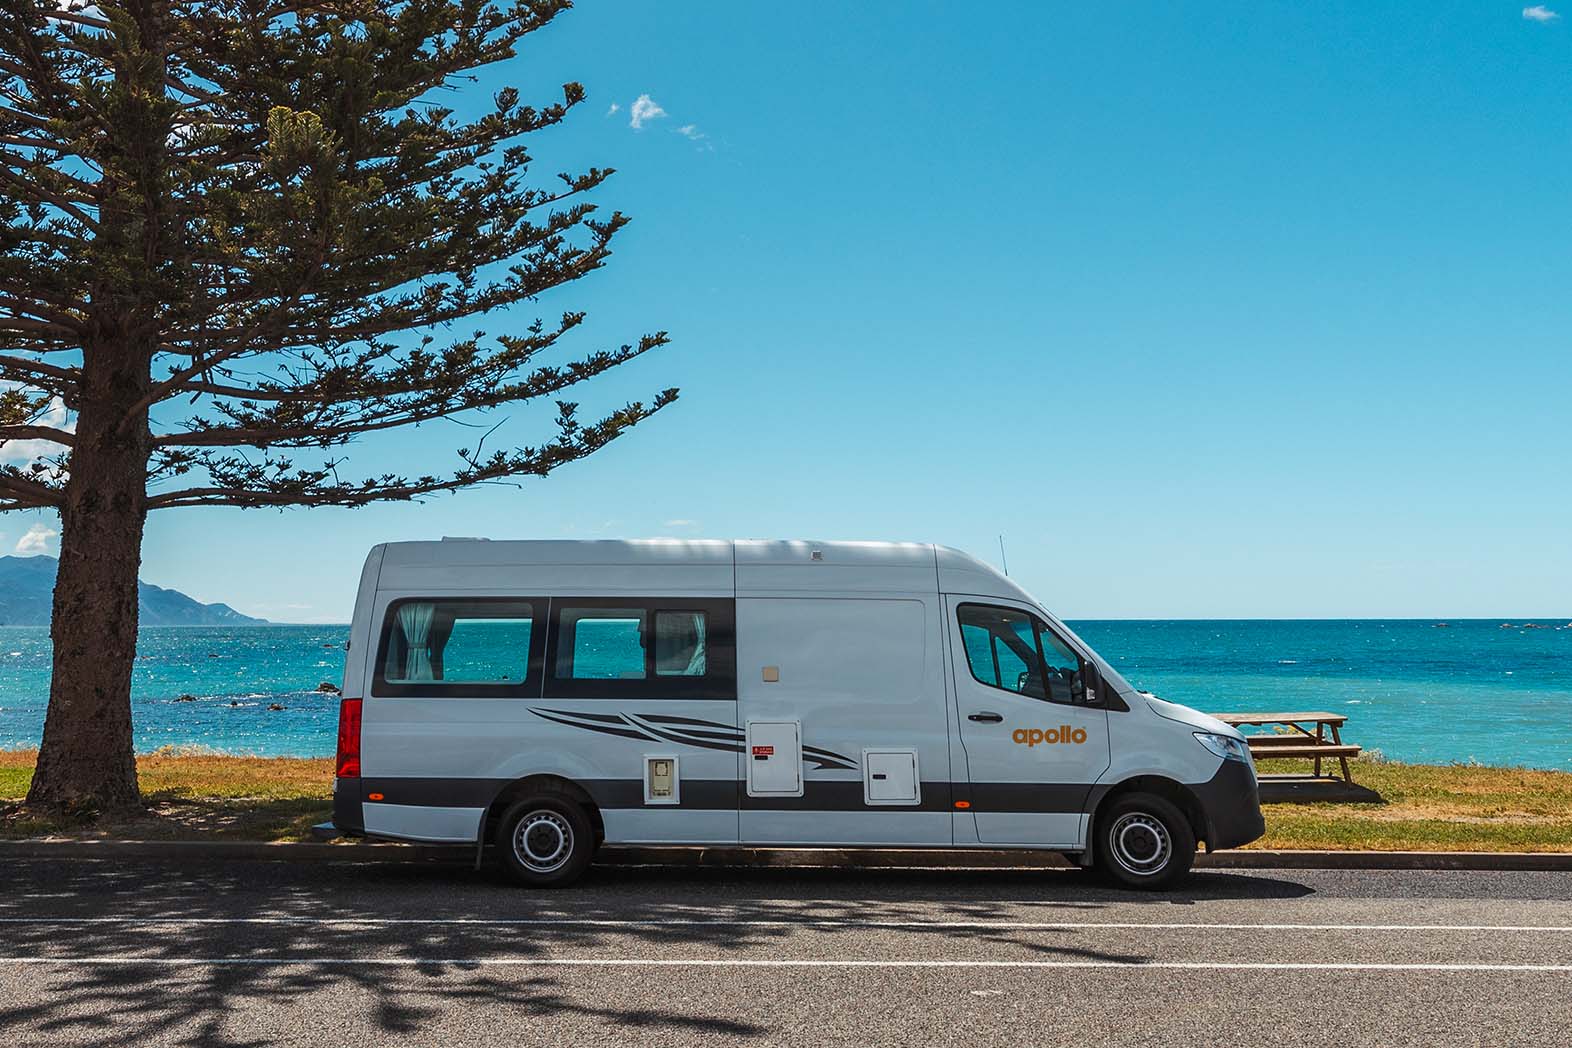 Apollo Camper at a New Zealand beach on a blue sky summer day